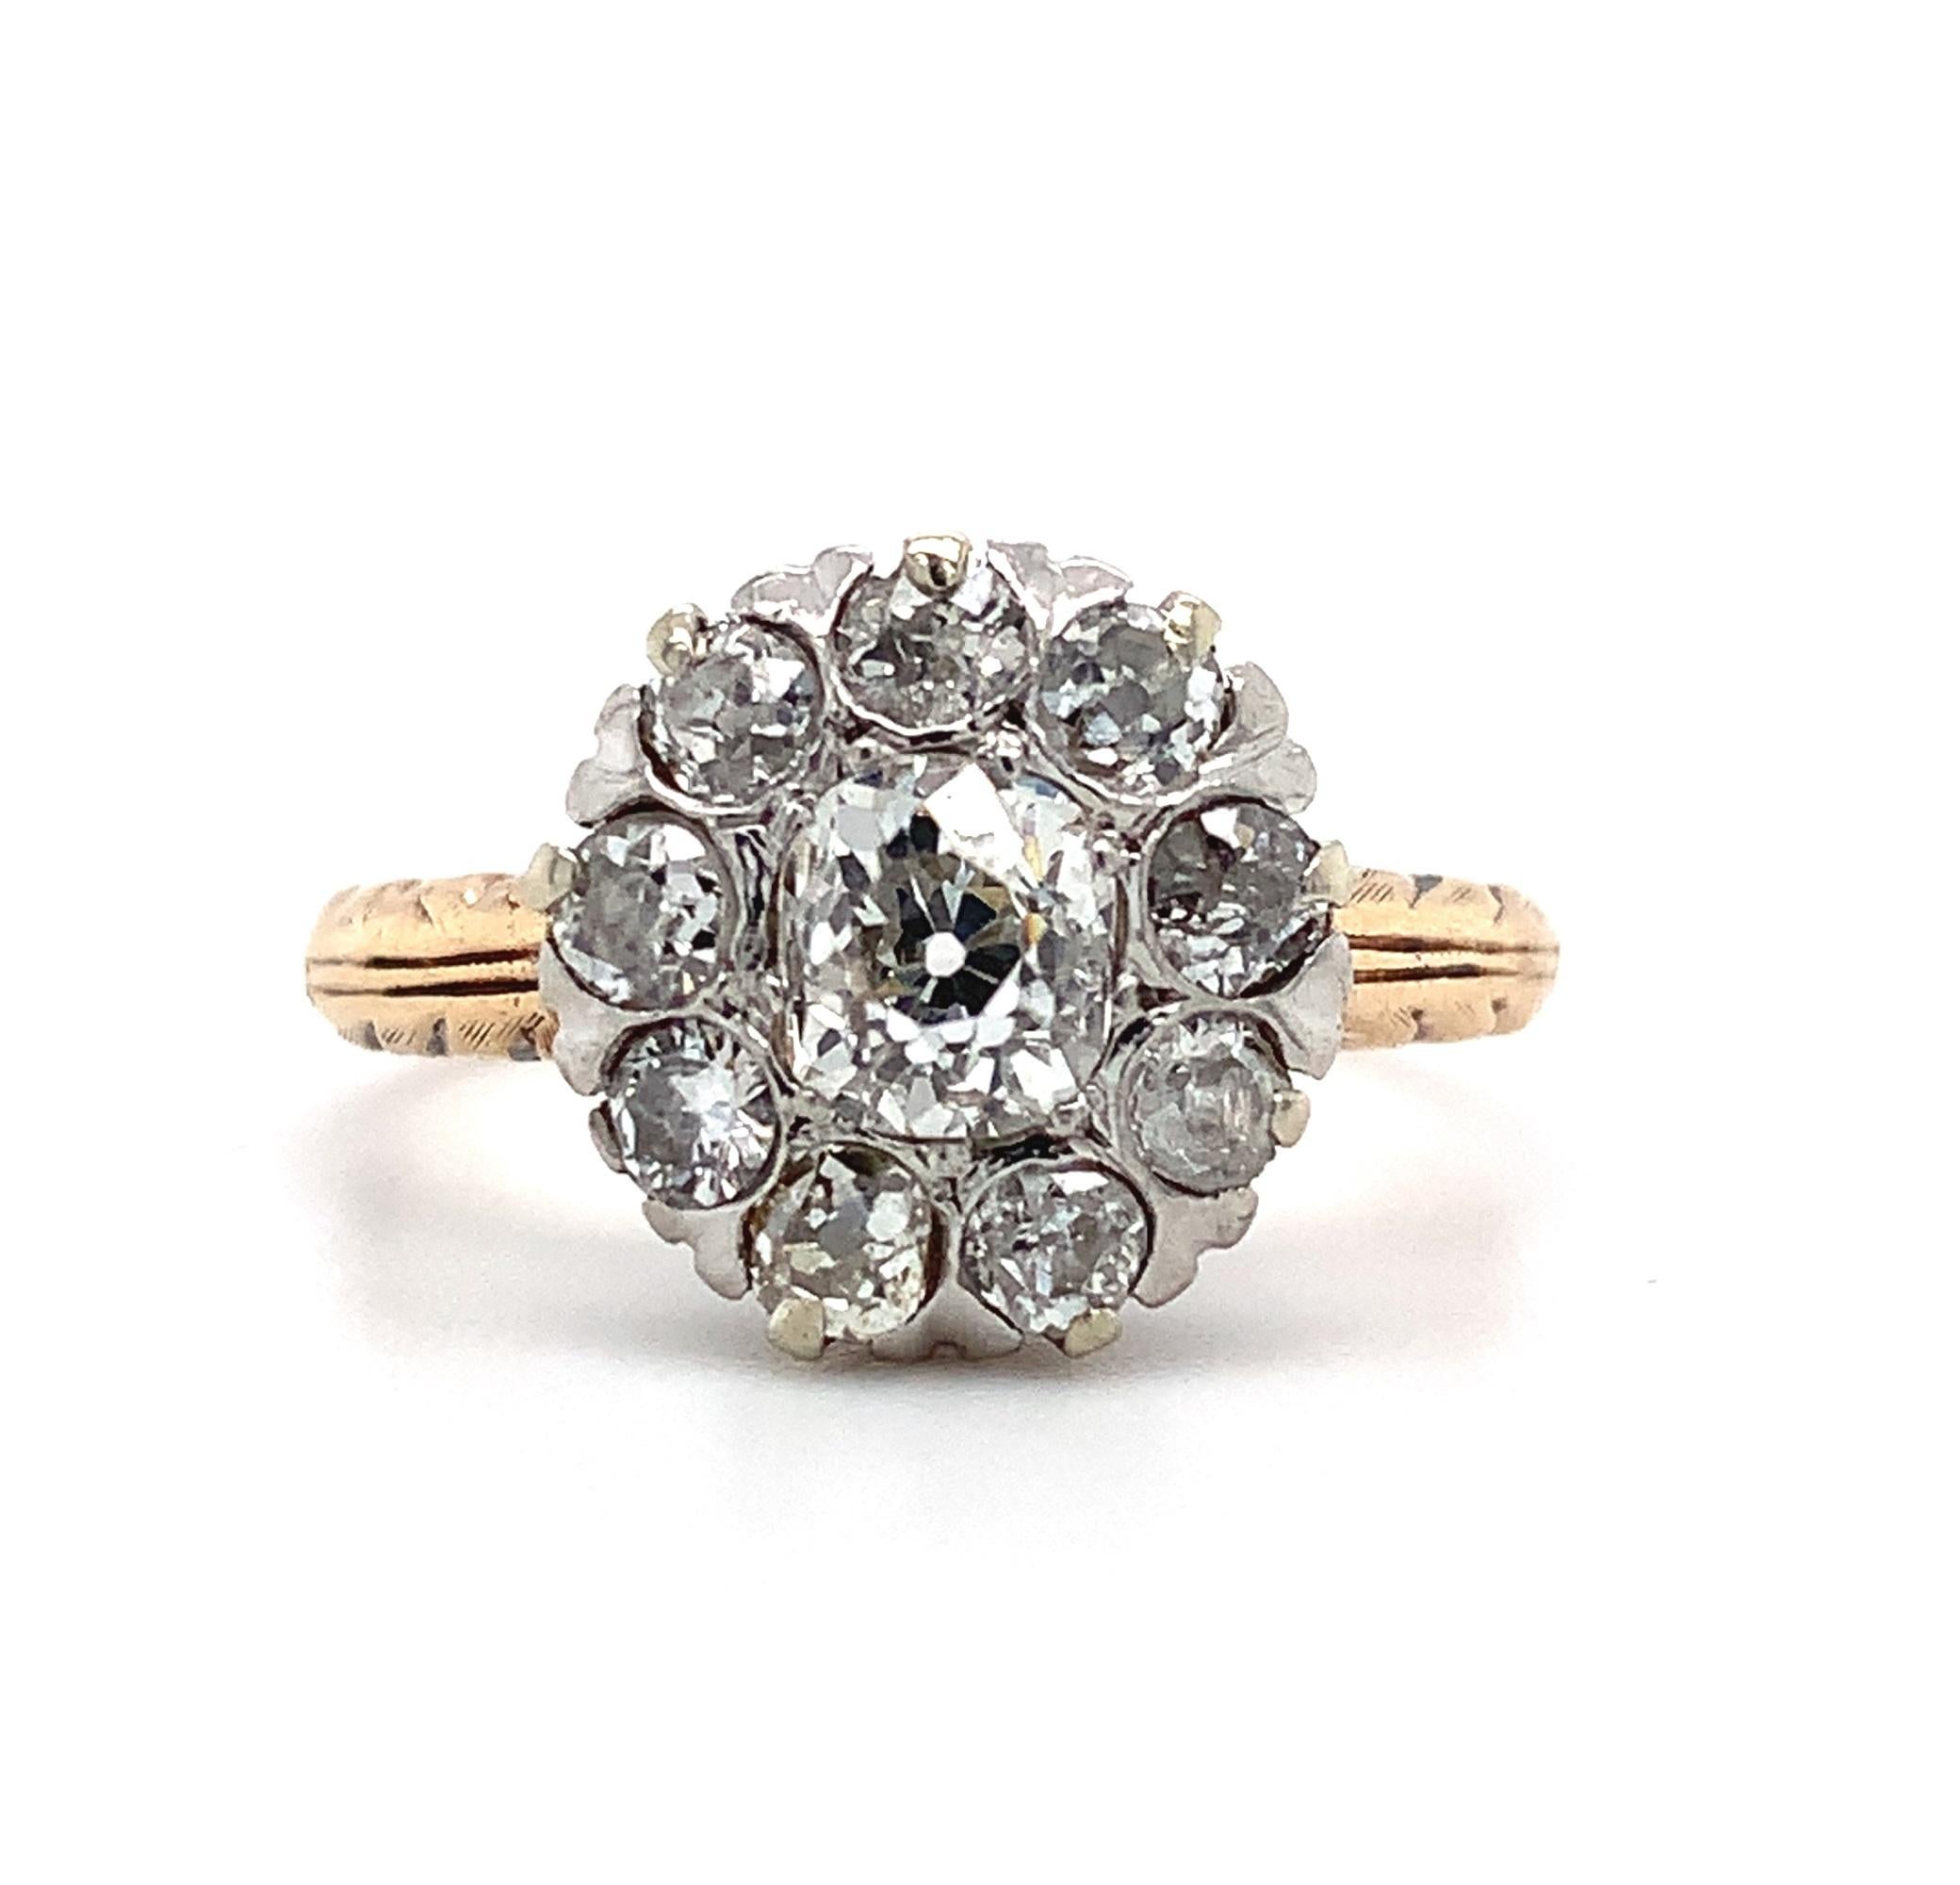 
14k yellow gold Victorian diamond ring with about 1.02 carats total weight of antique mine cut diamonds set in a platinum top. The center diamond measures about 4.5mm and the 8 surrounding diamonds measure about 2.5mm each. The diamonds have with